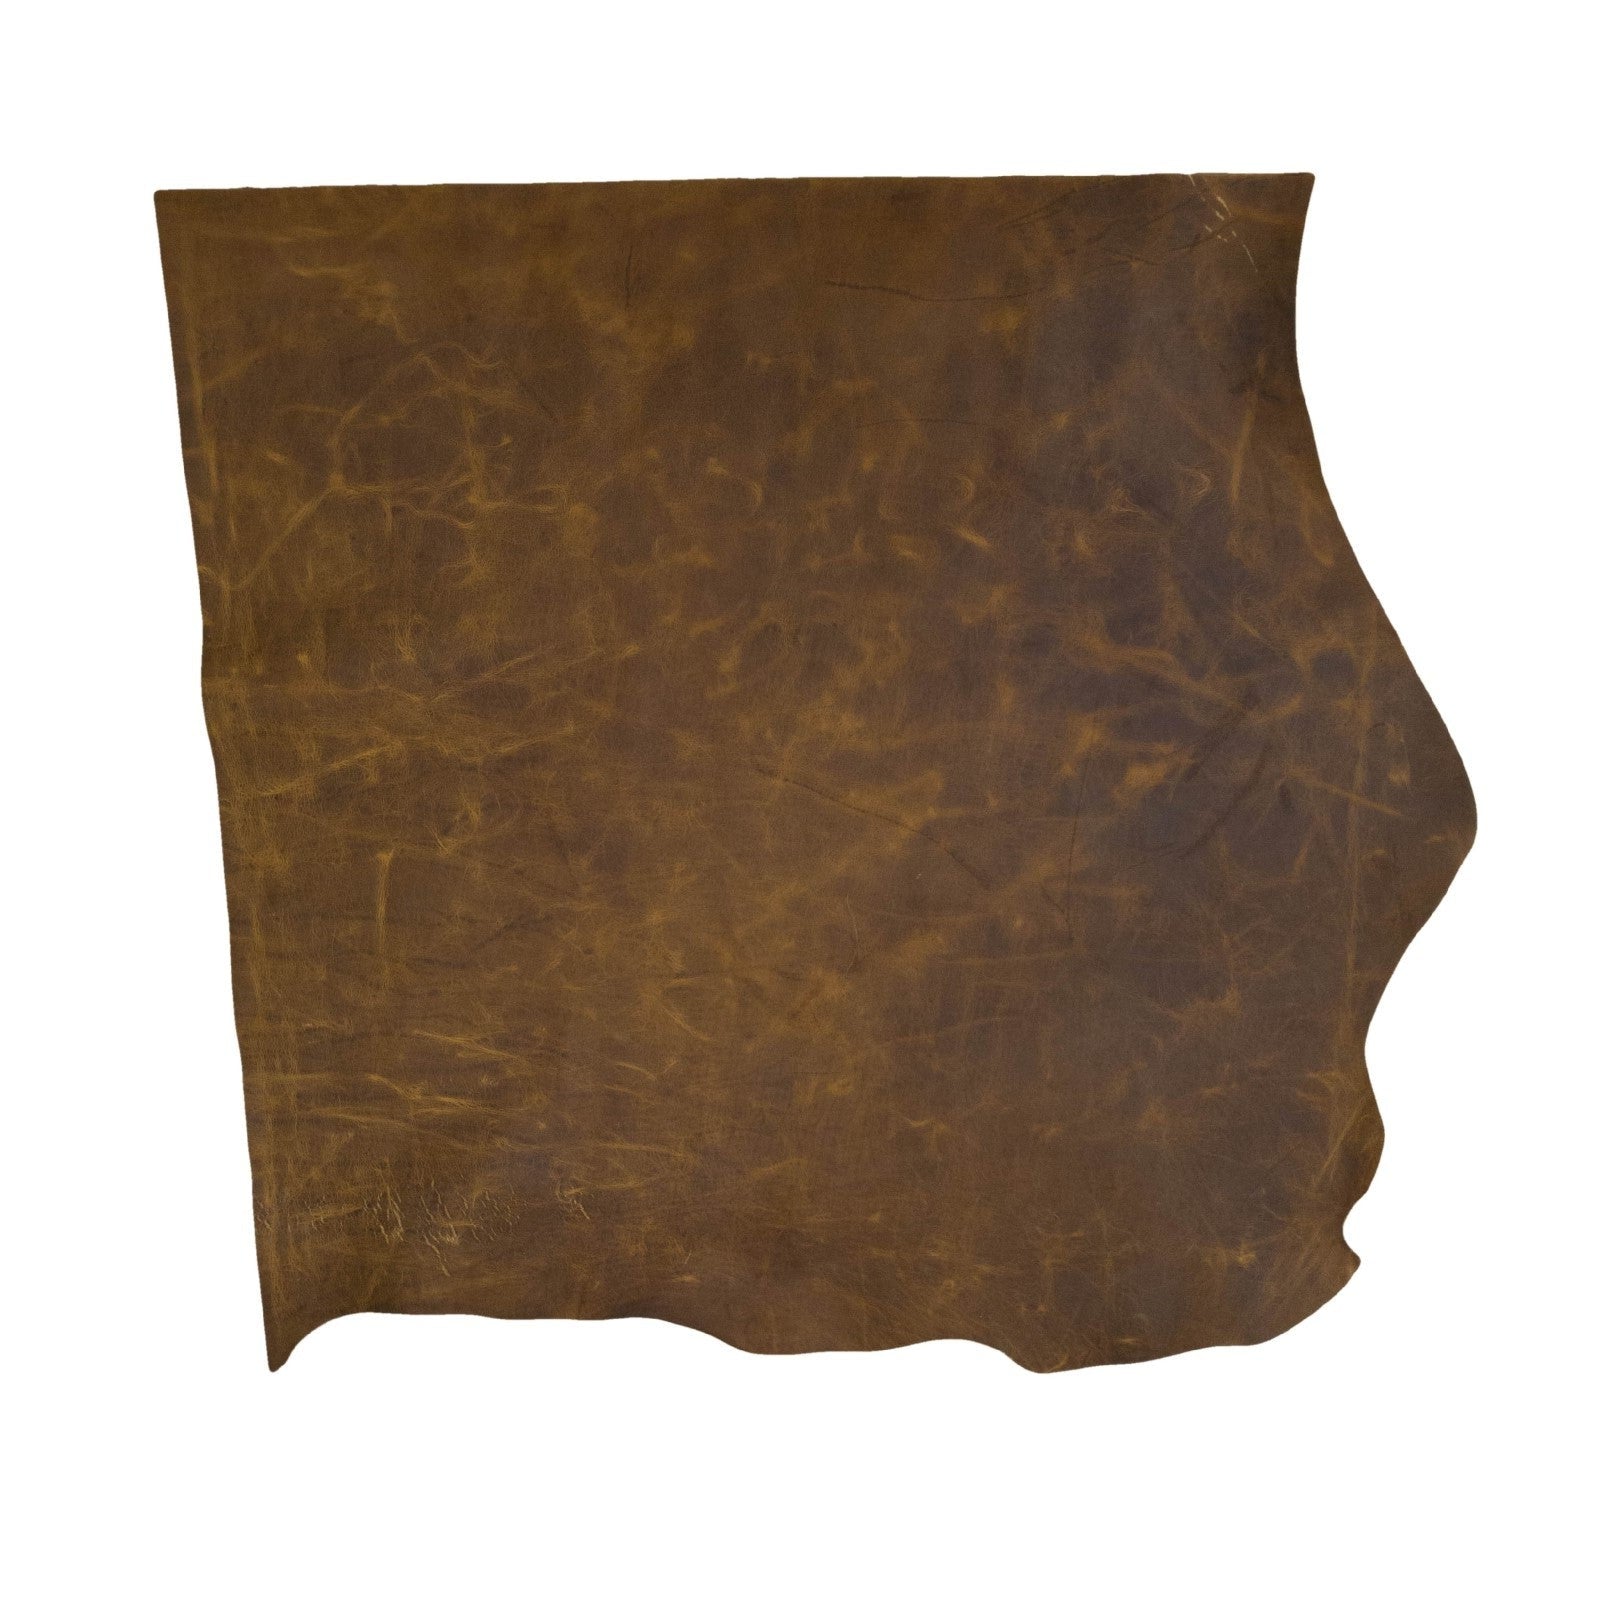 Golden Acorn Brown, 6.5-32 SqFt, 2-3 oz, Pull up Sides & Pieces, Crazy Buffalo, 6.5-7.5 / Project Piece (Bottom) | The Leather Guy